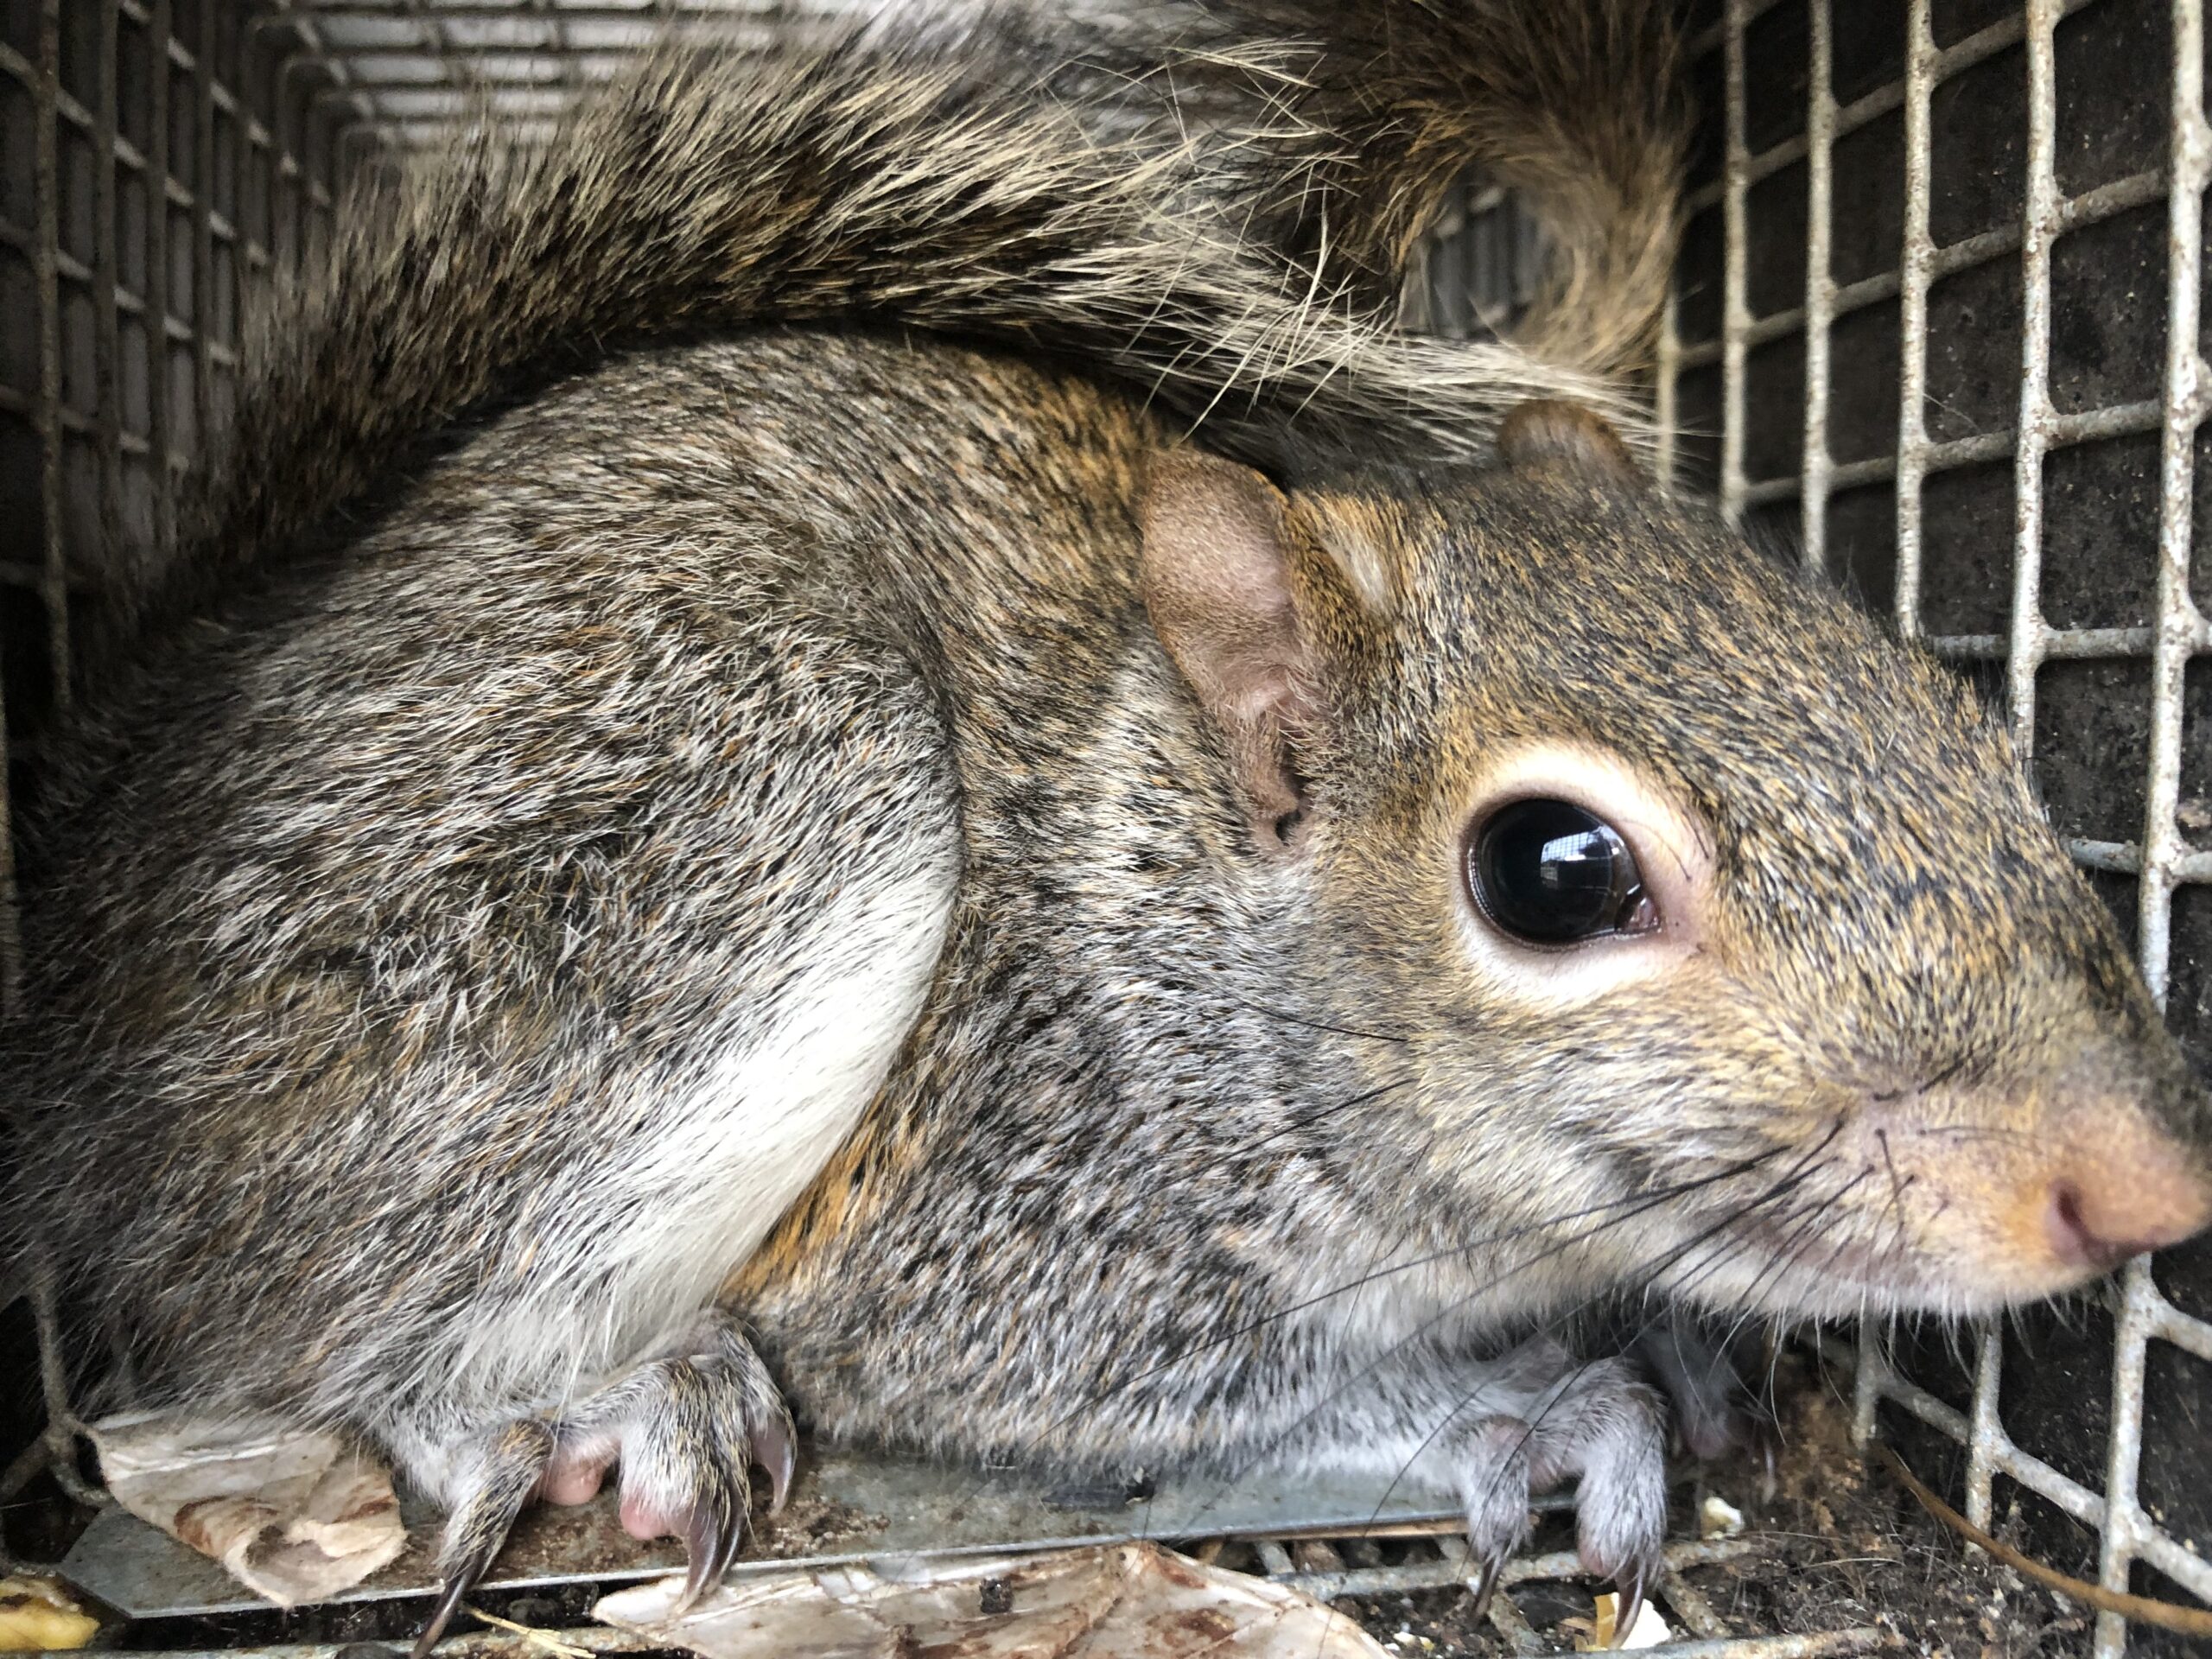 Squirrel in a humane cage trap.